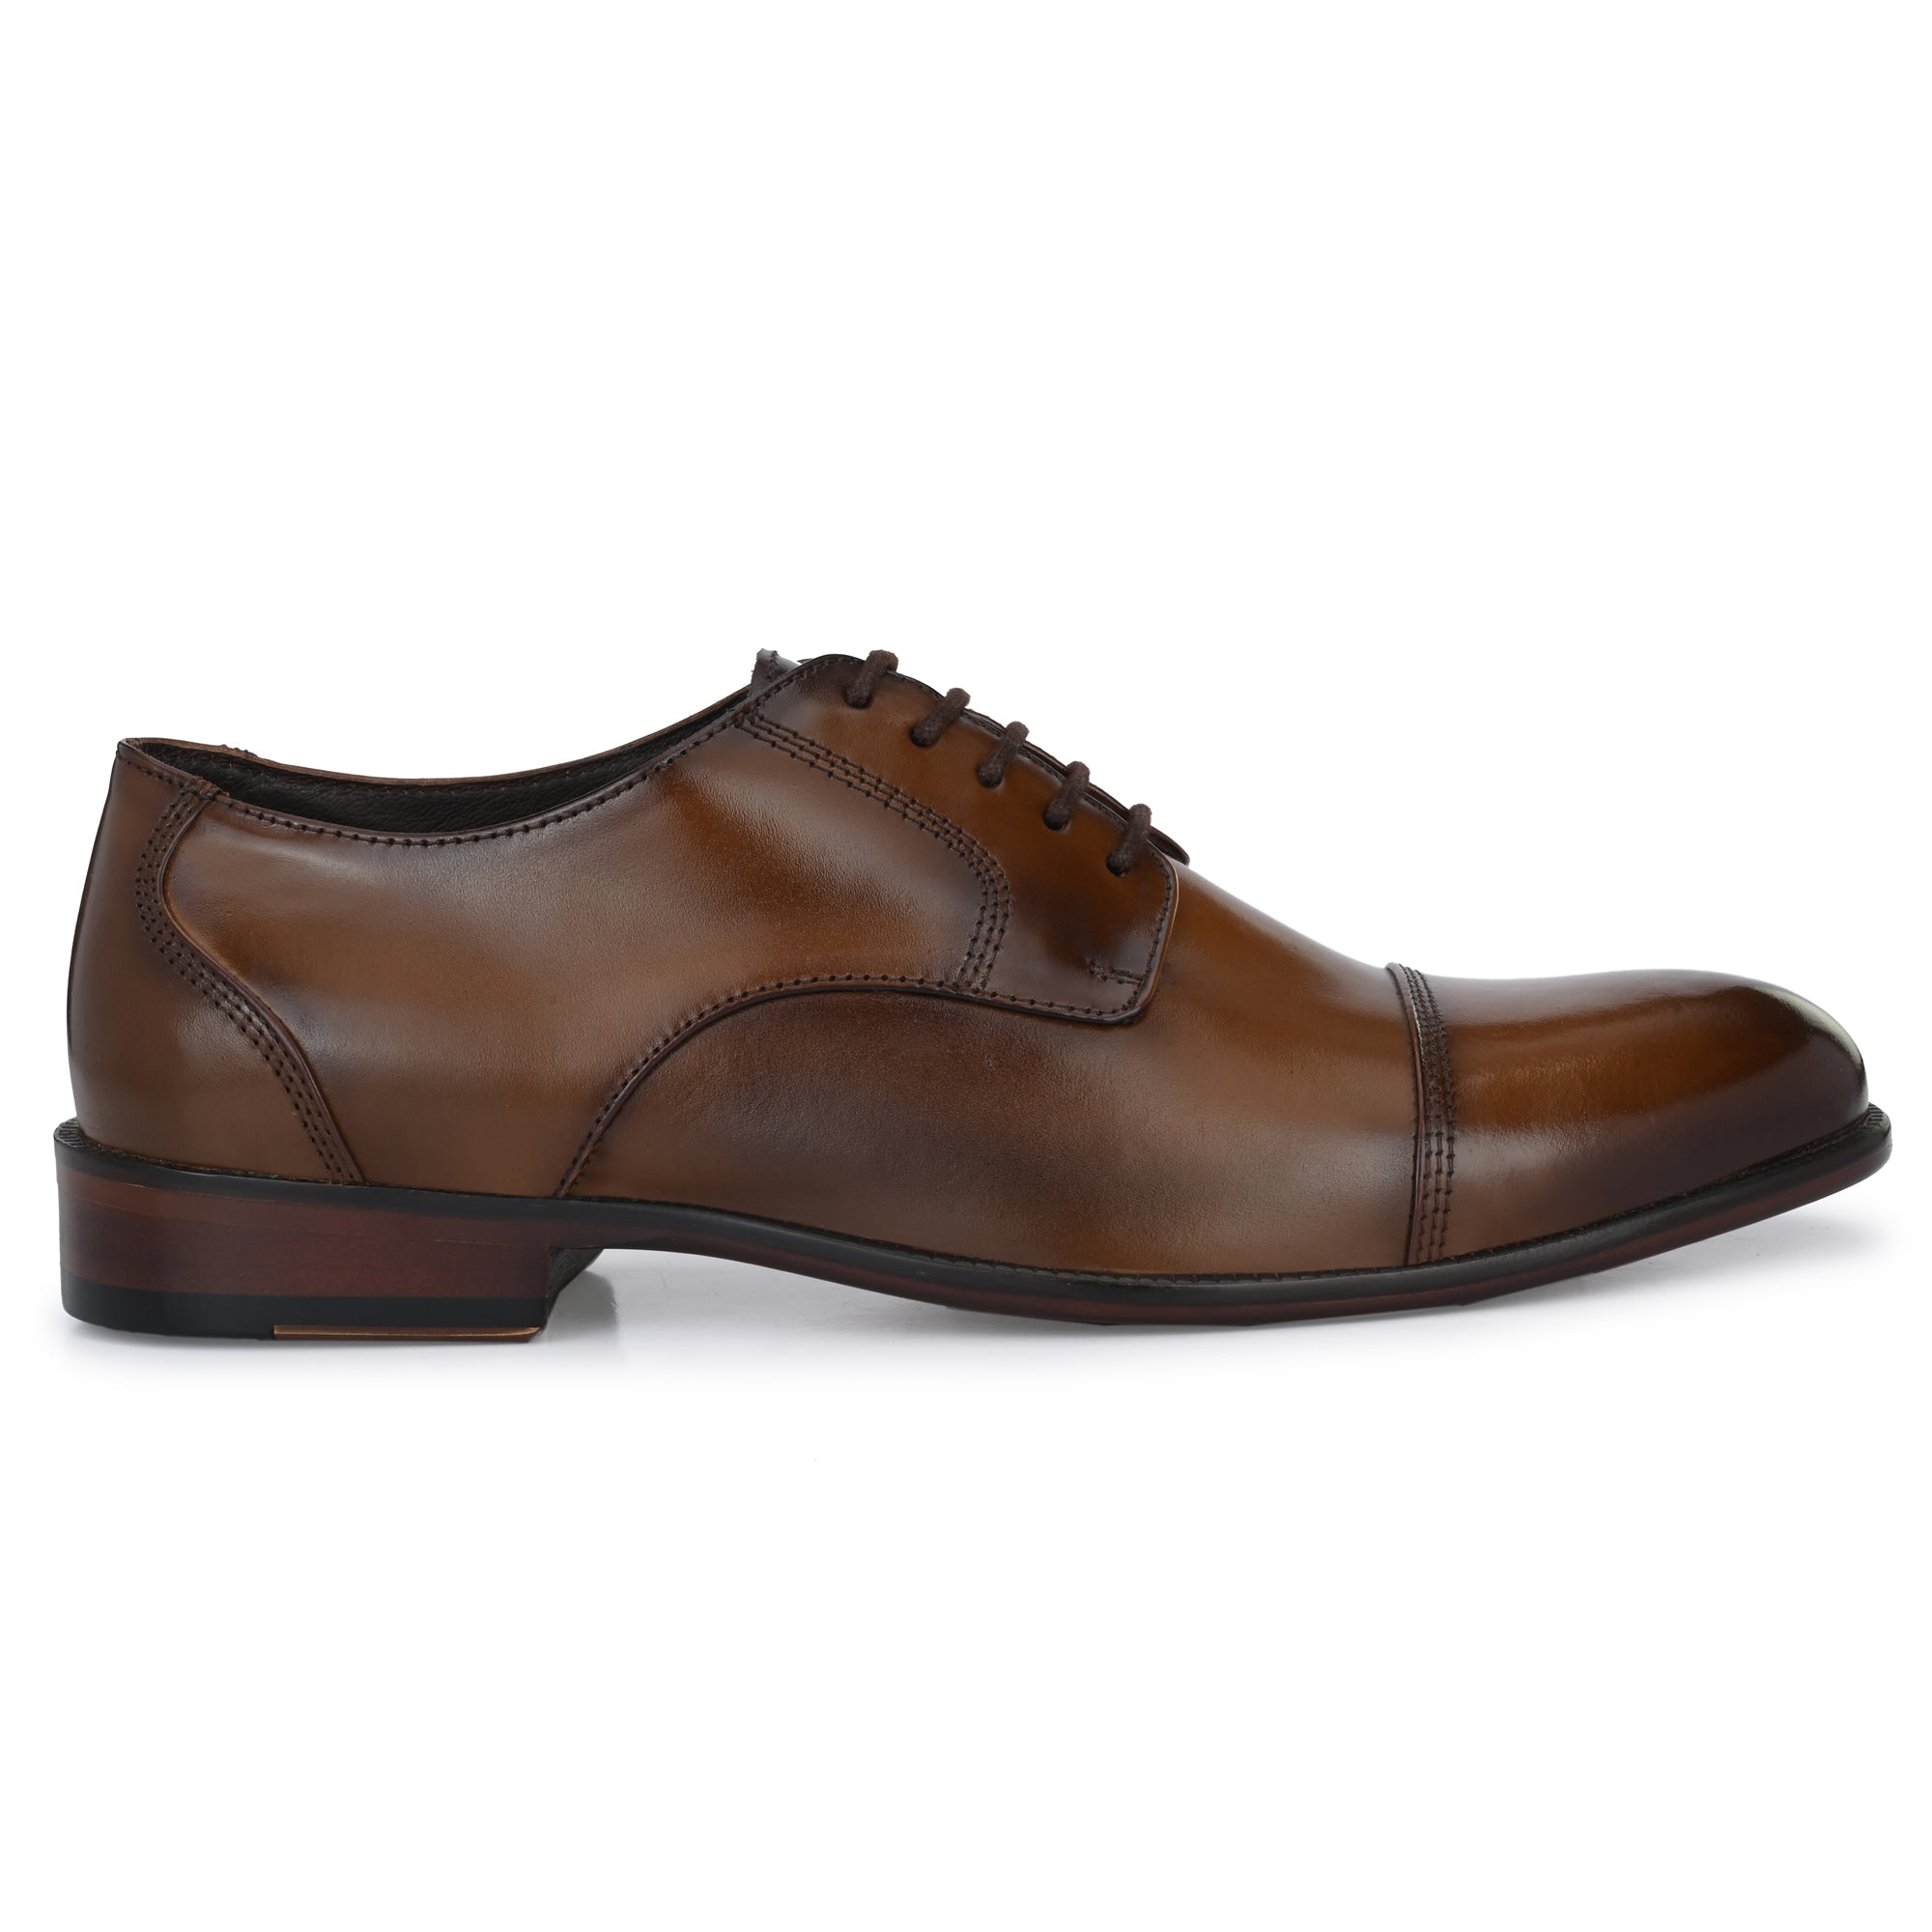 Tan Formal Lace-Up Shoes For Men